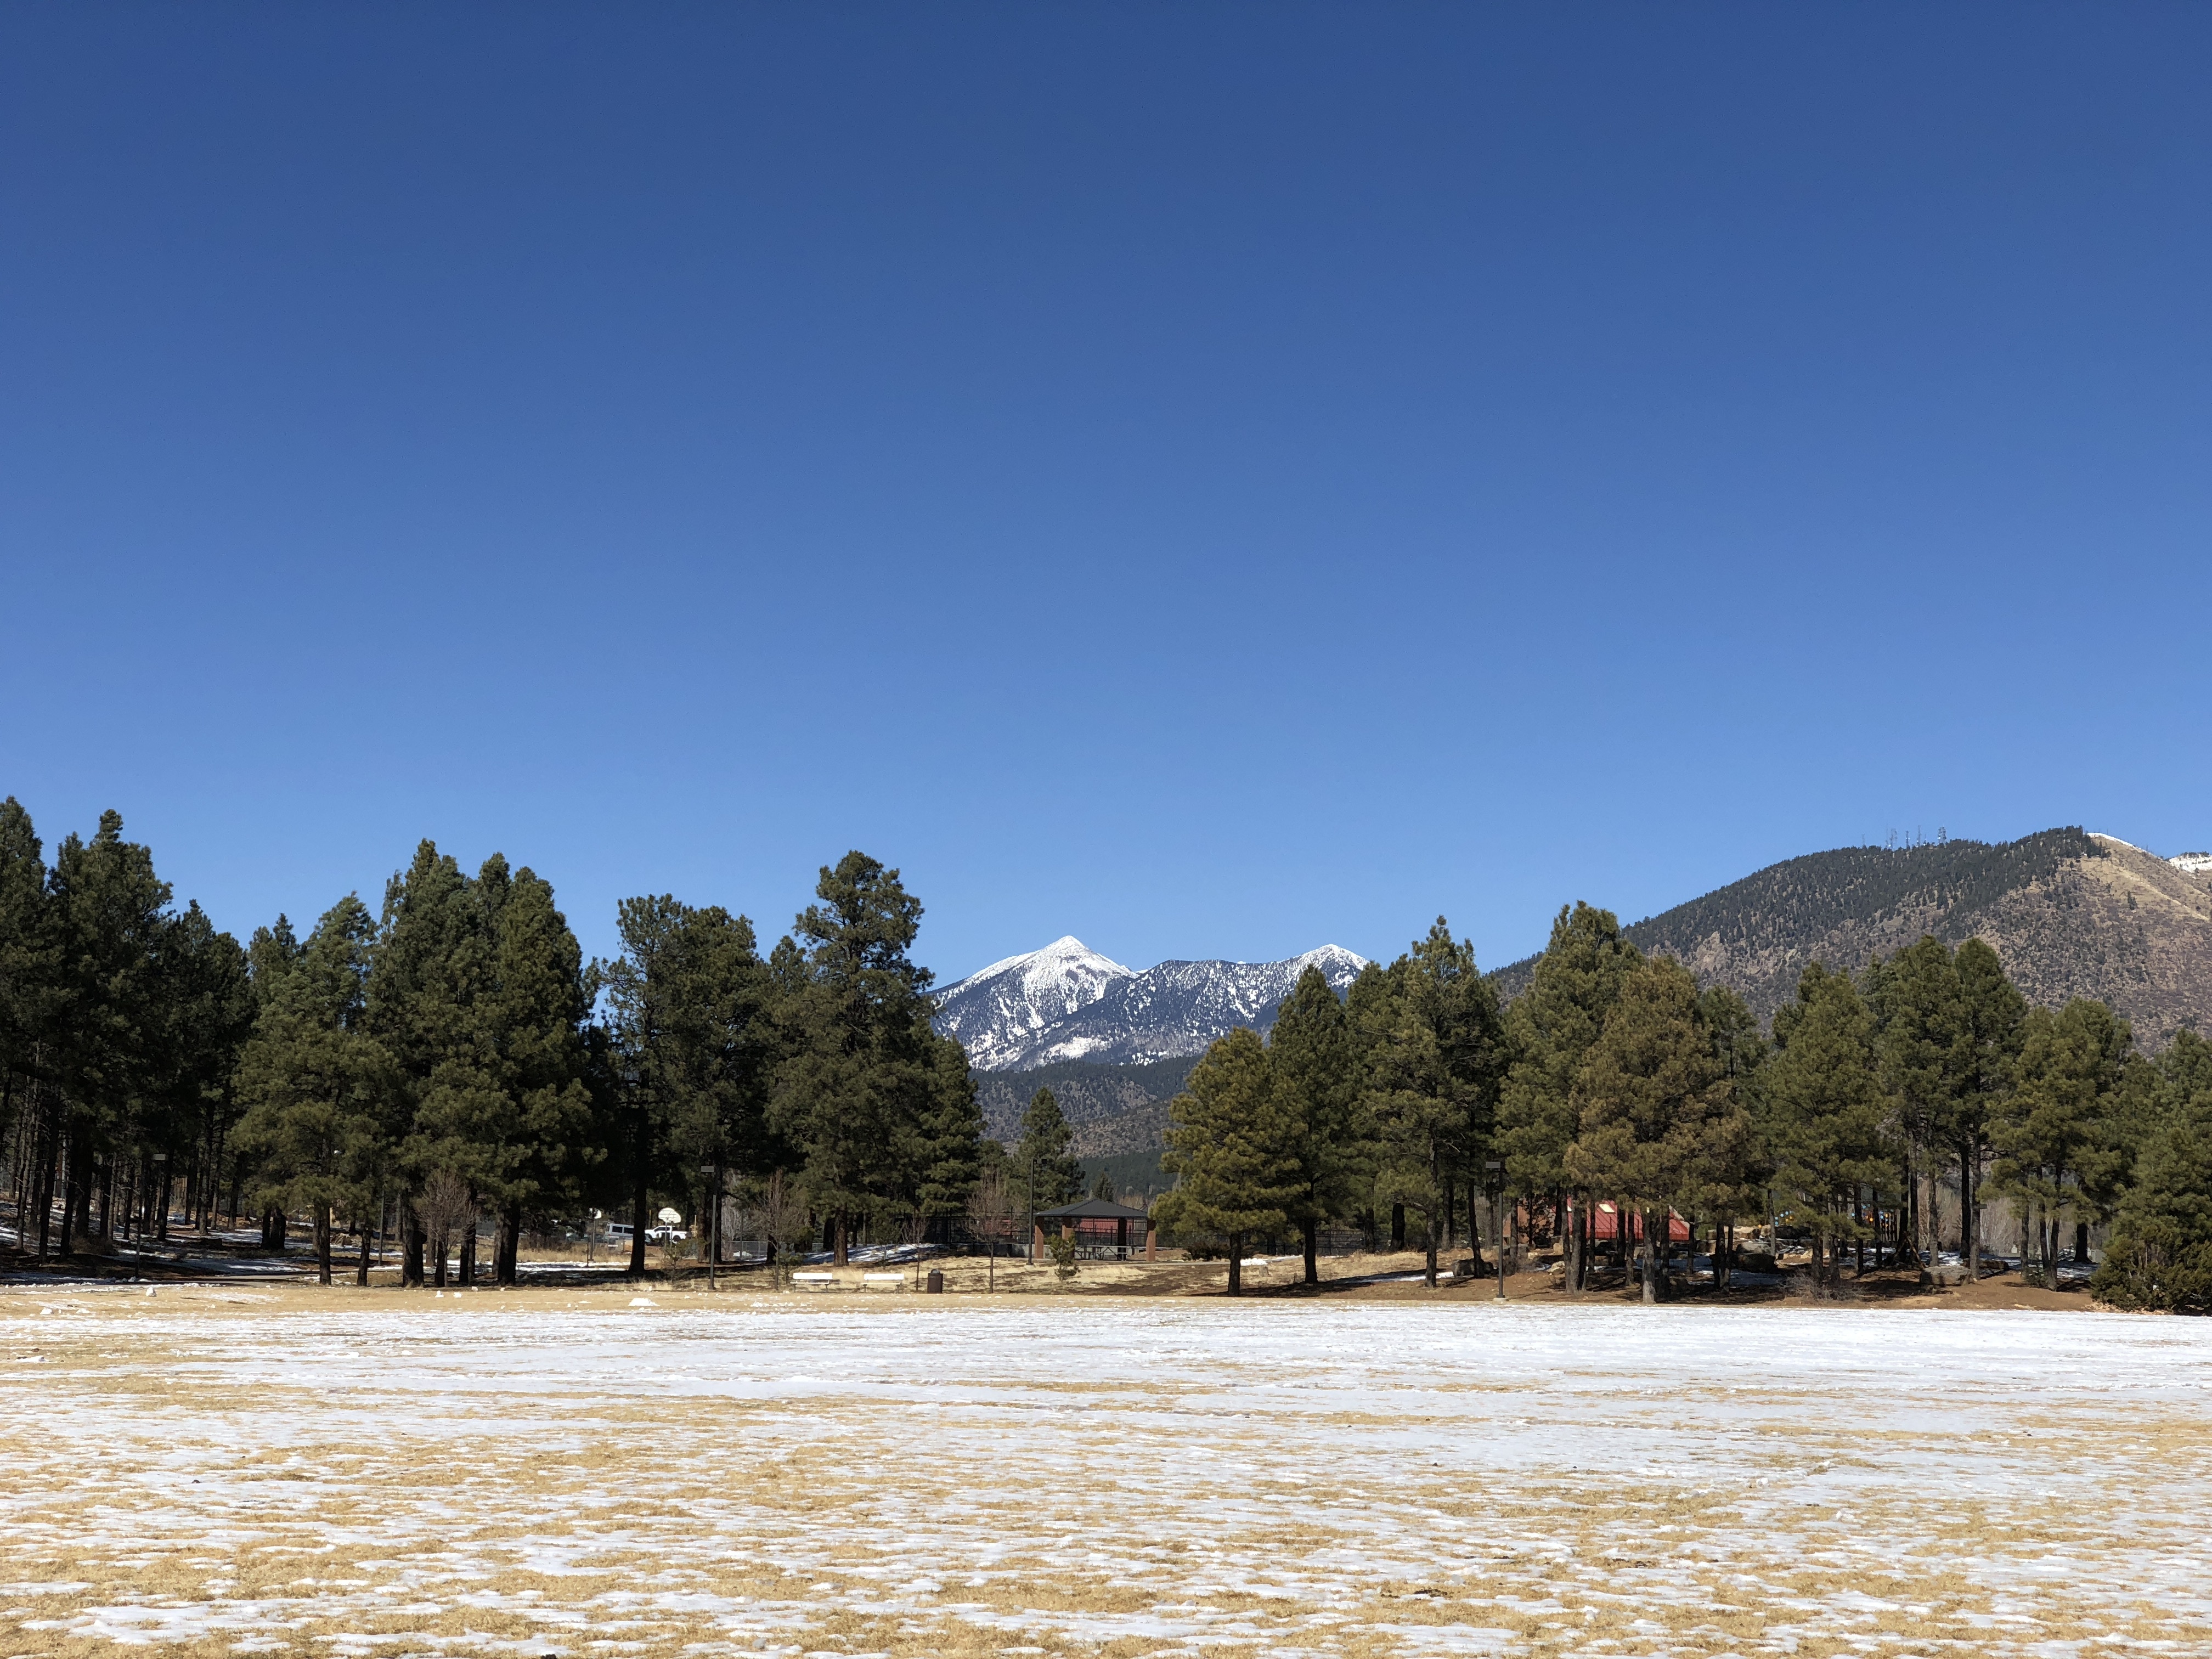 Snowy park with San Francisco Peaks in the background 